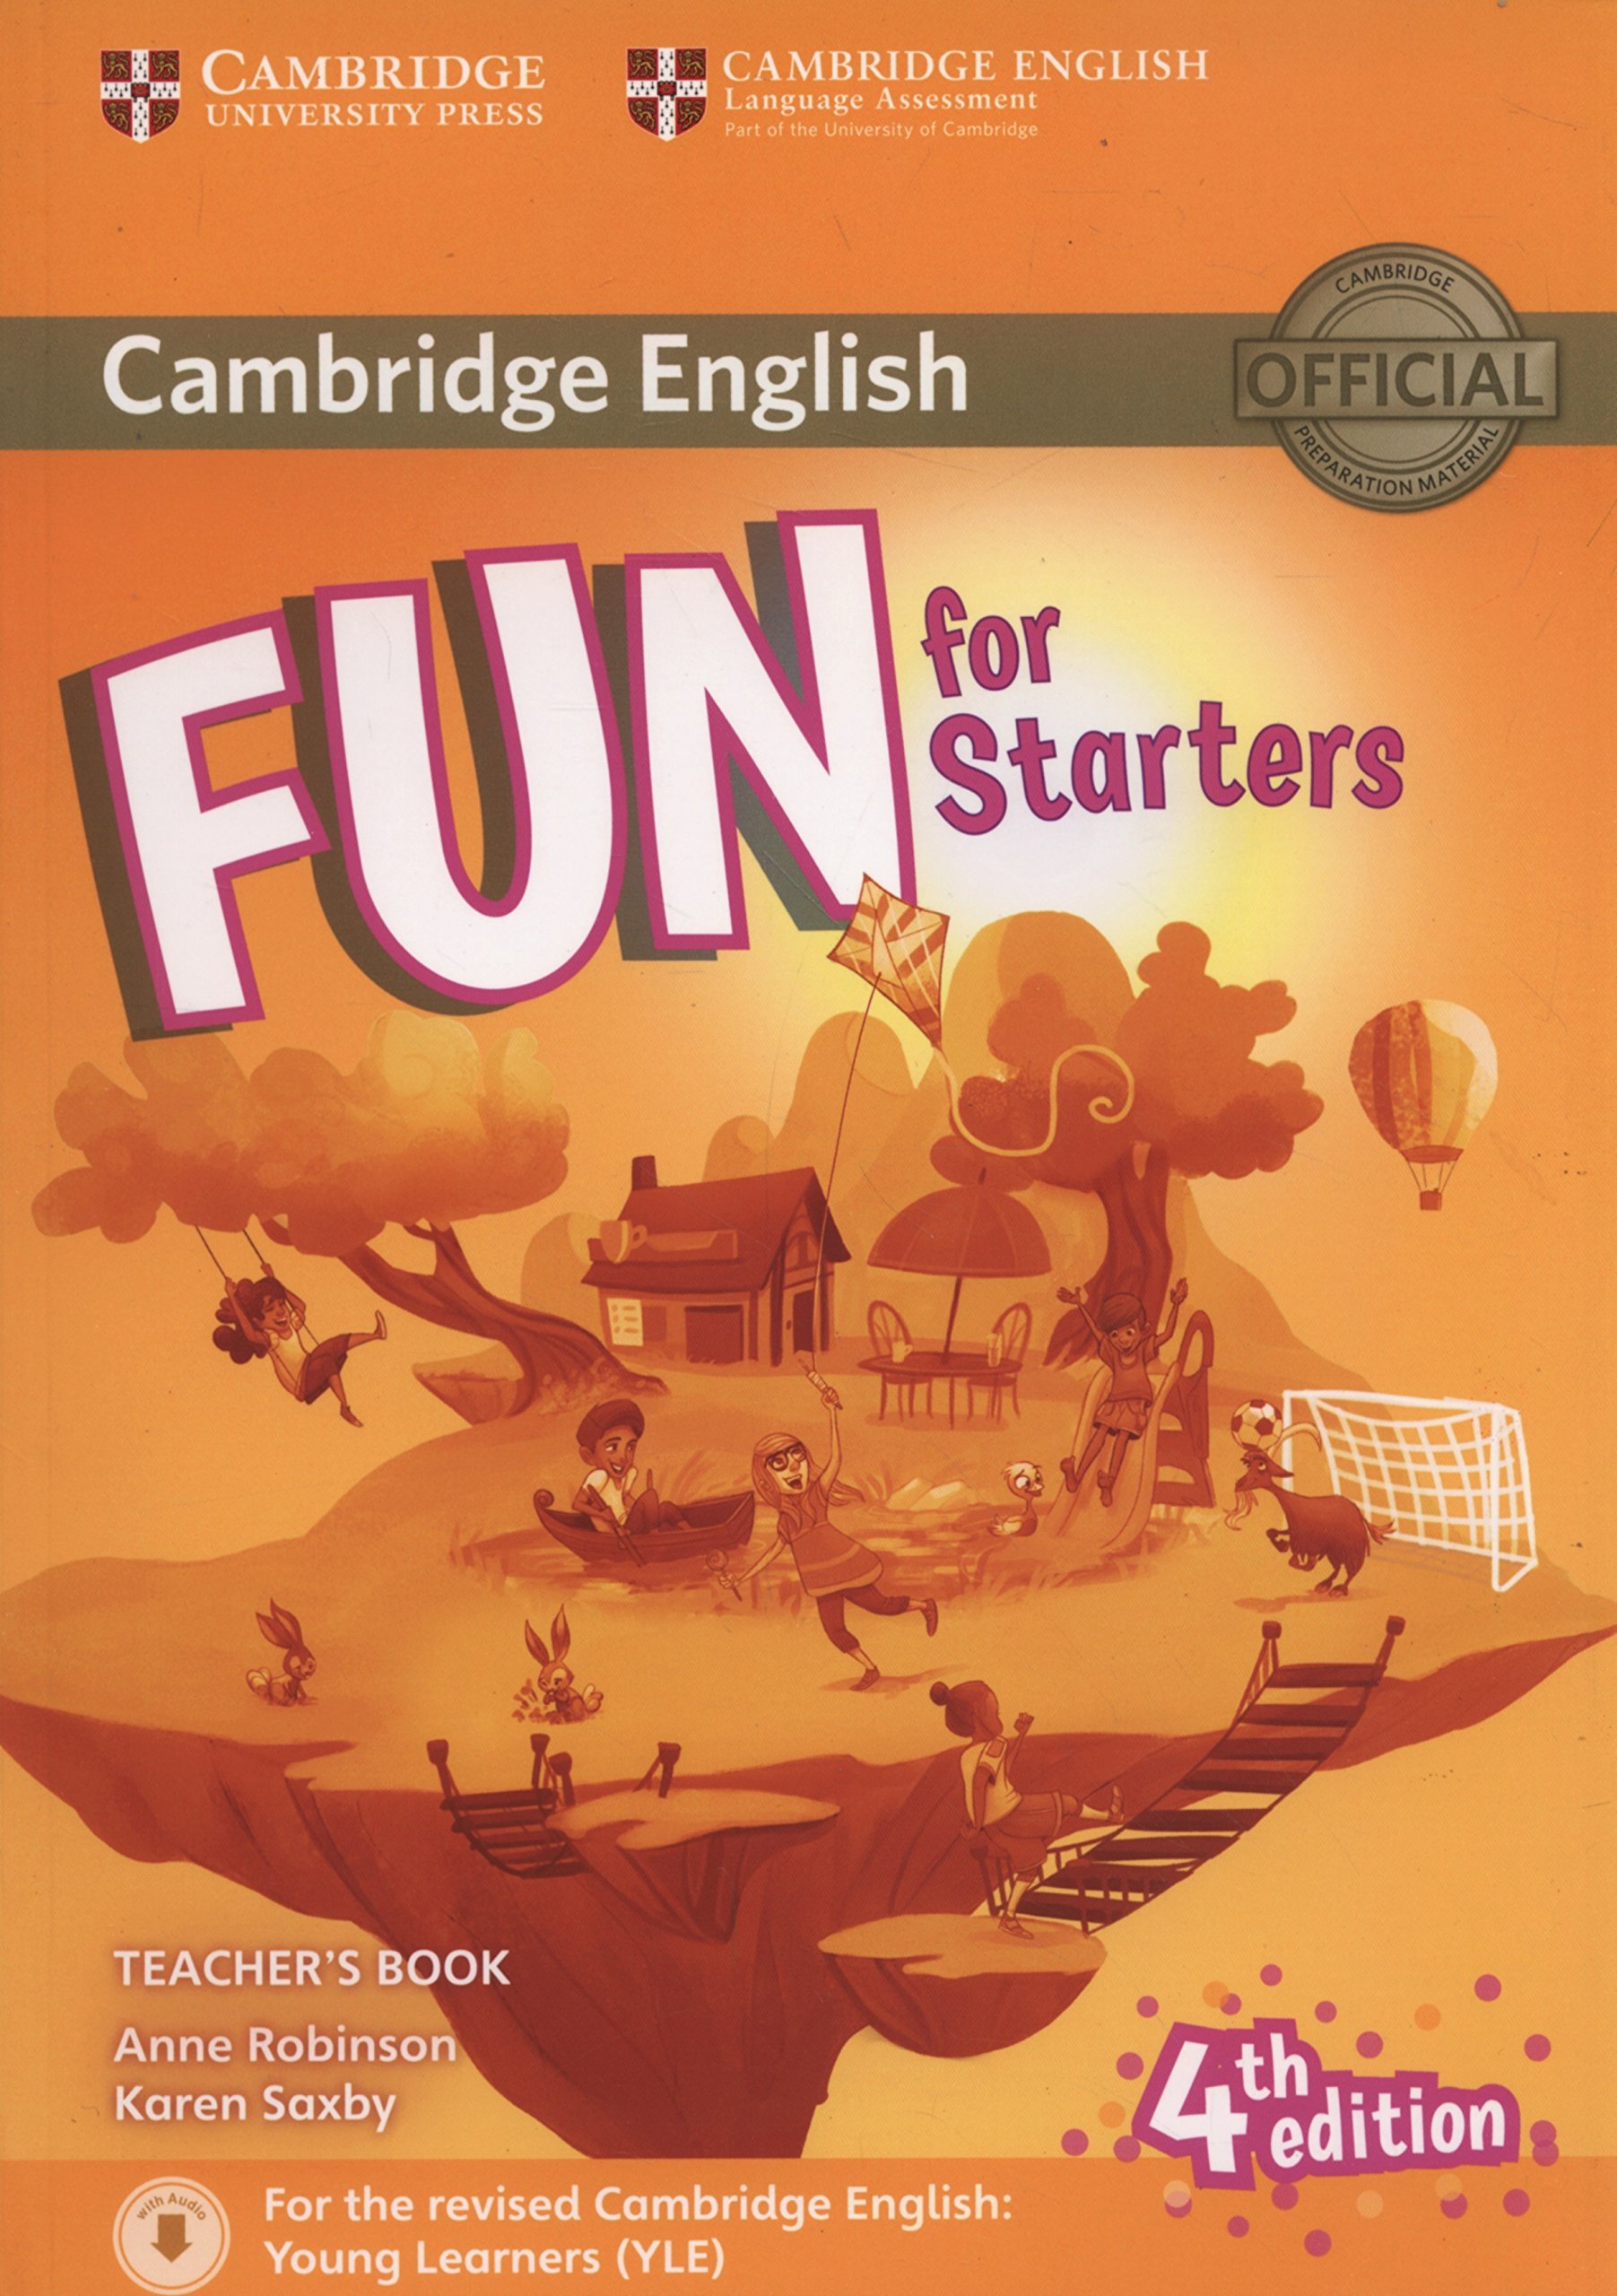 Fun for Starters Teacher’s Book with Downloadable Audio